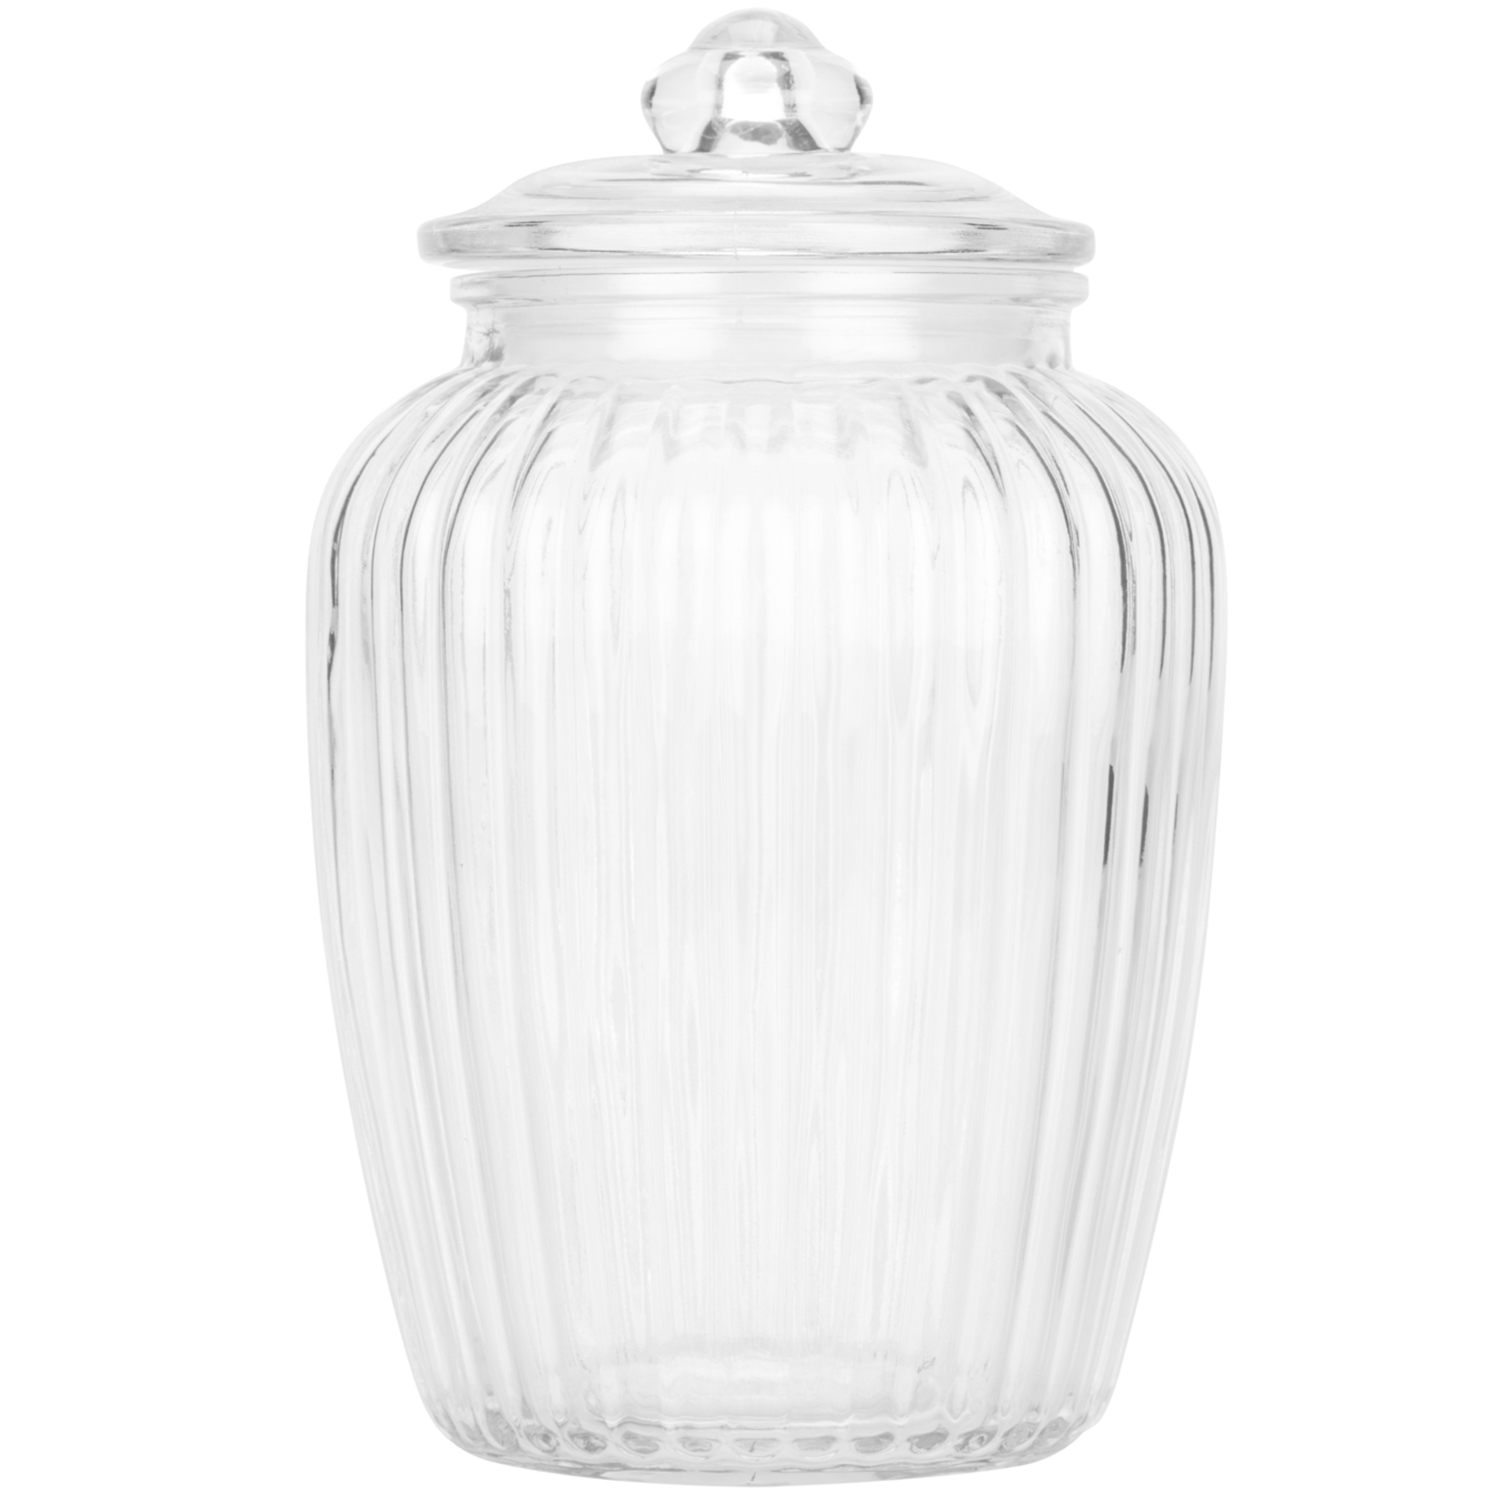 My Home Glass Jar with Lid 15cm Image